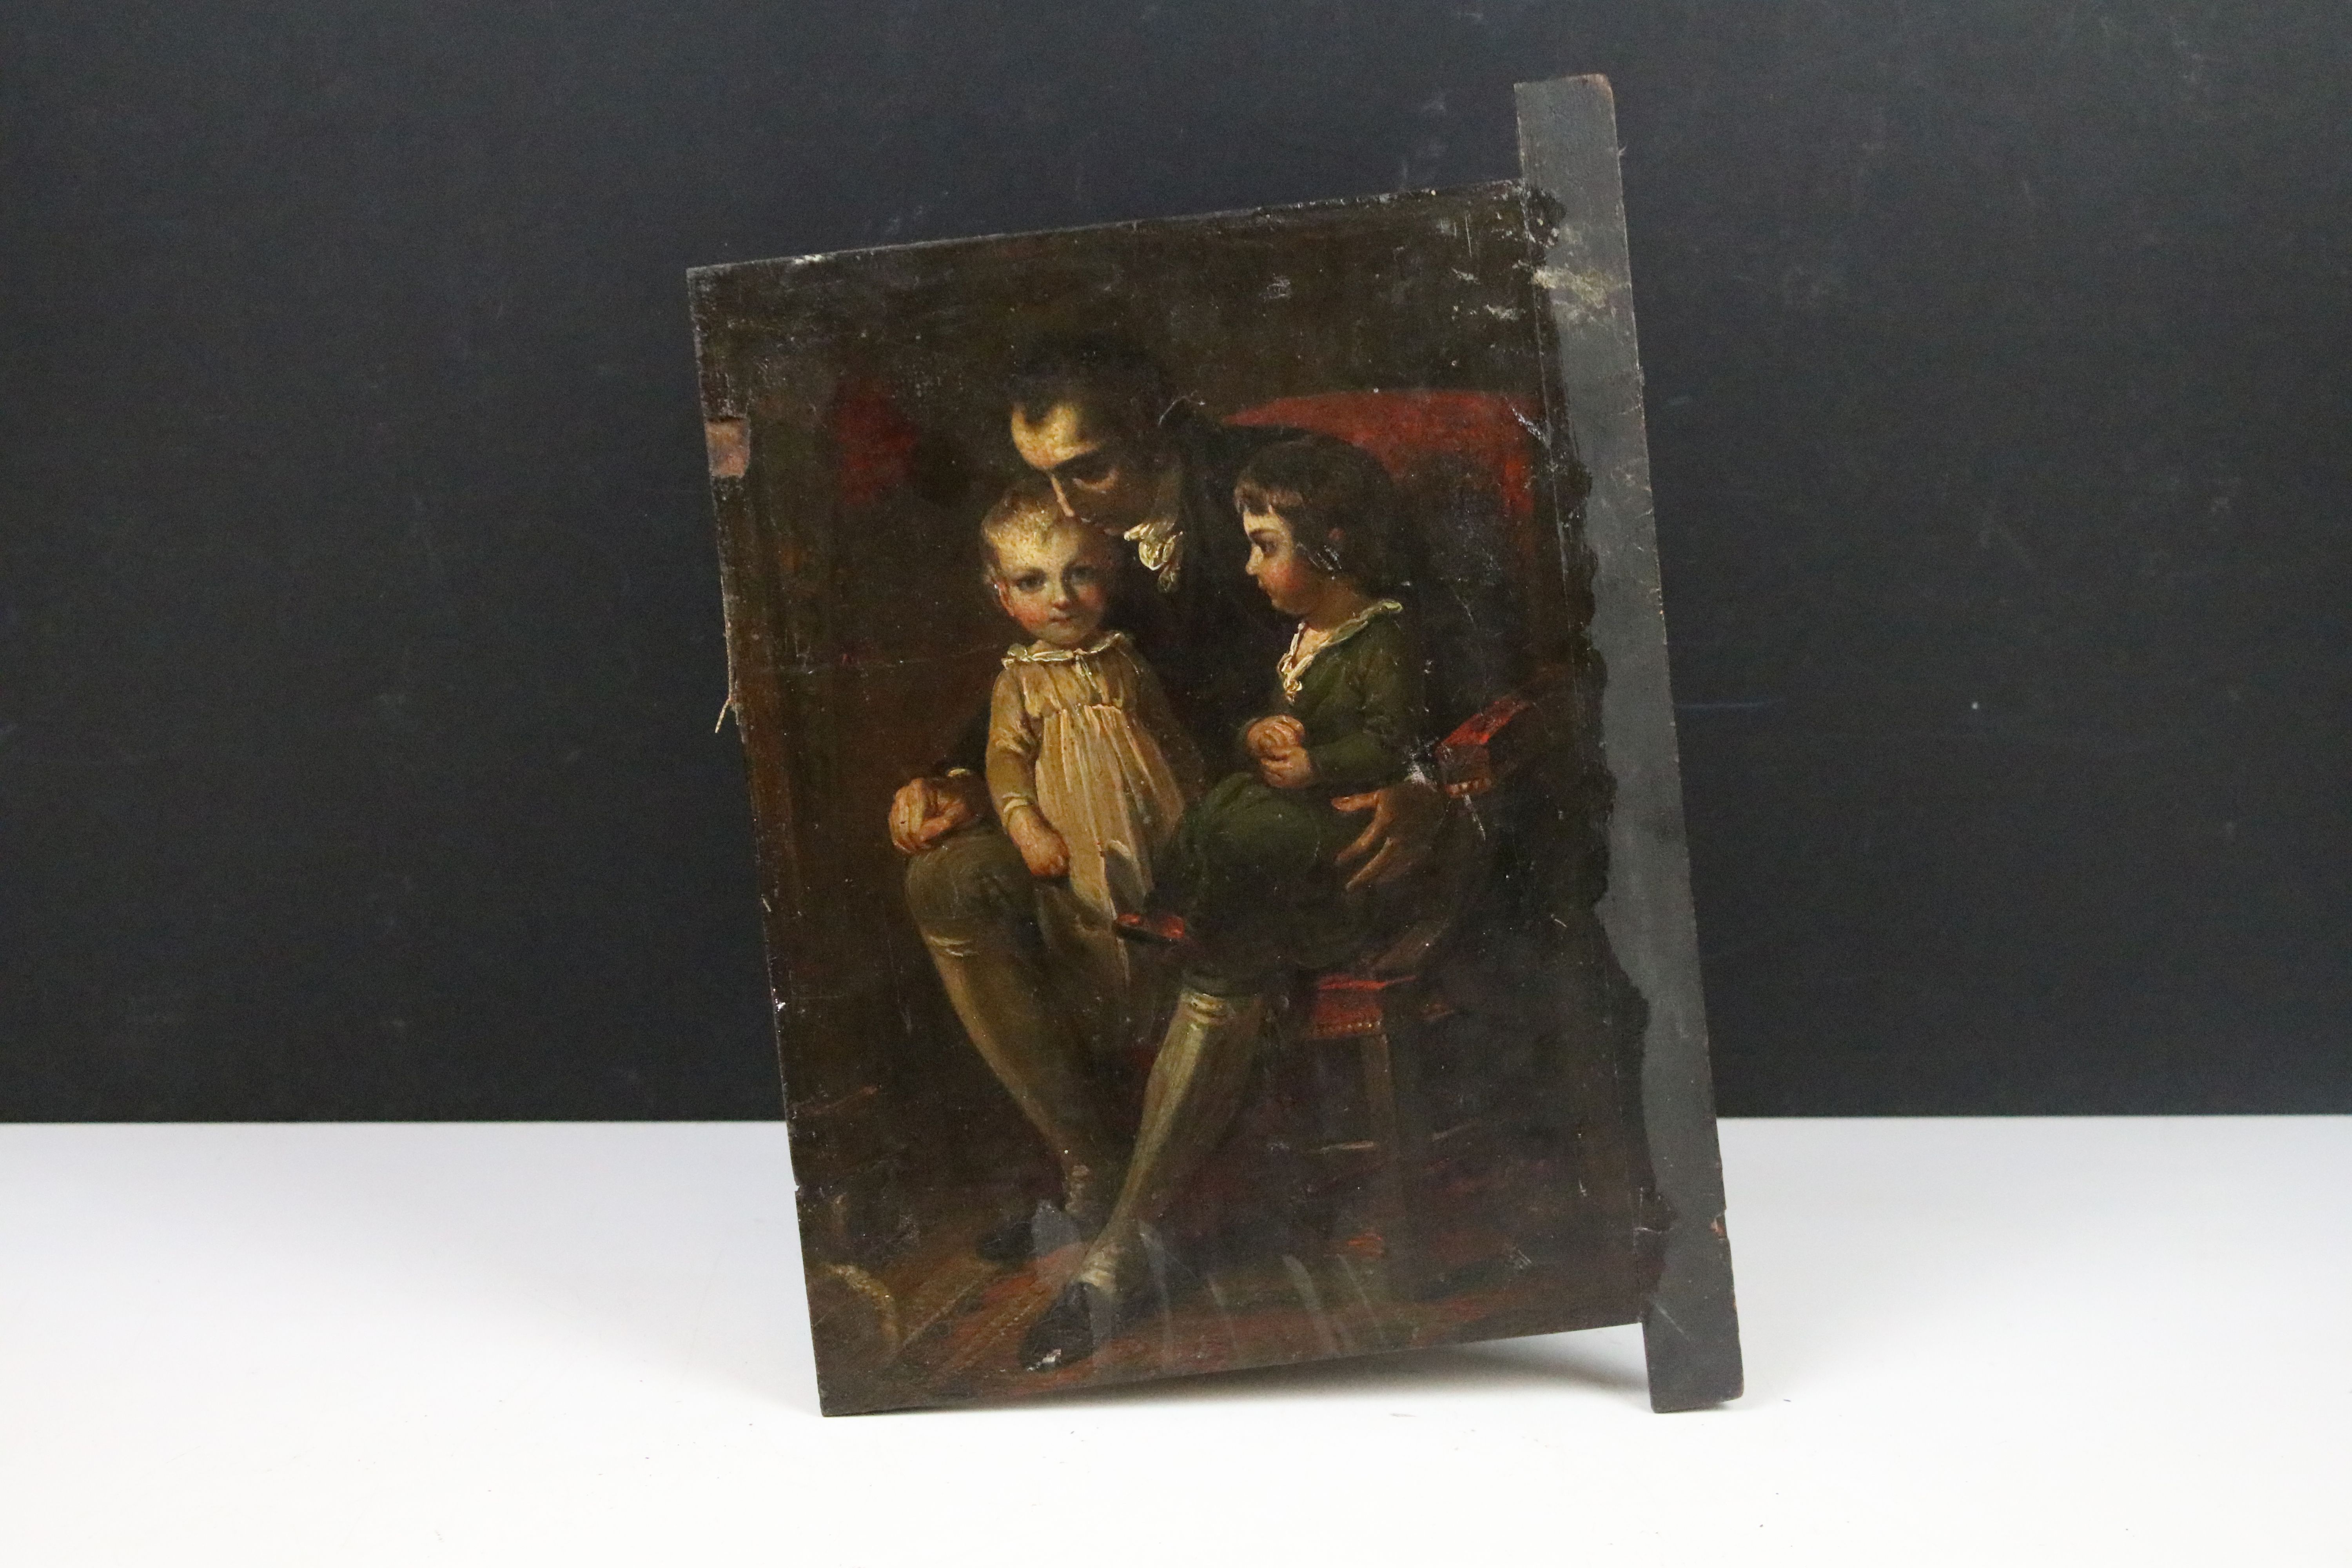 19th century English School, man with two children, oil on panel, indistinctly inscribed on tape